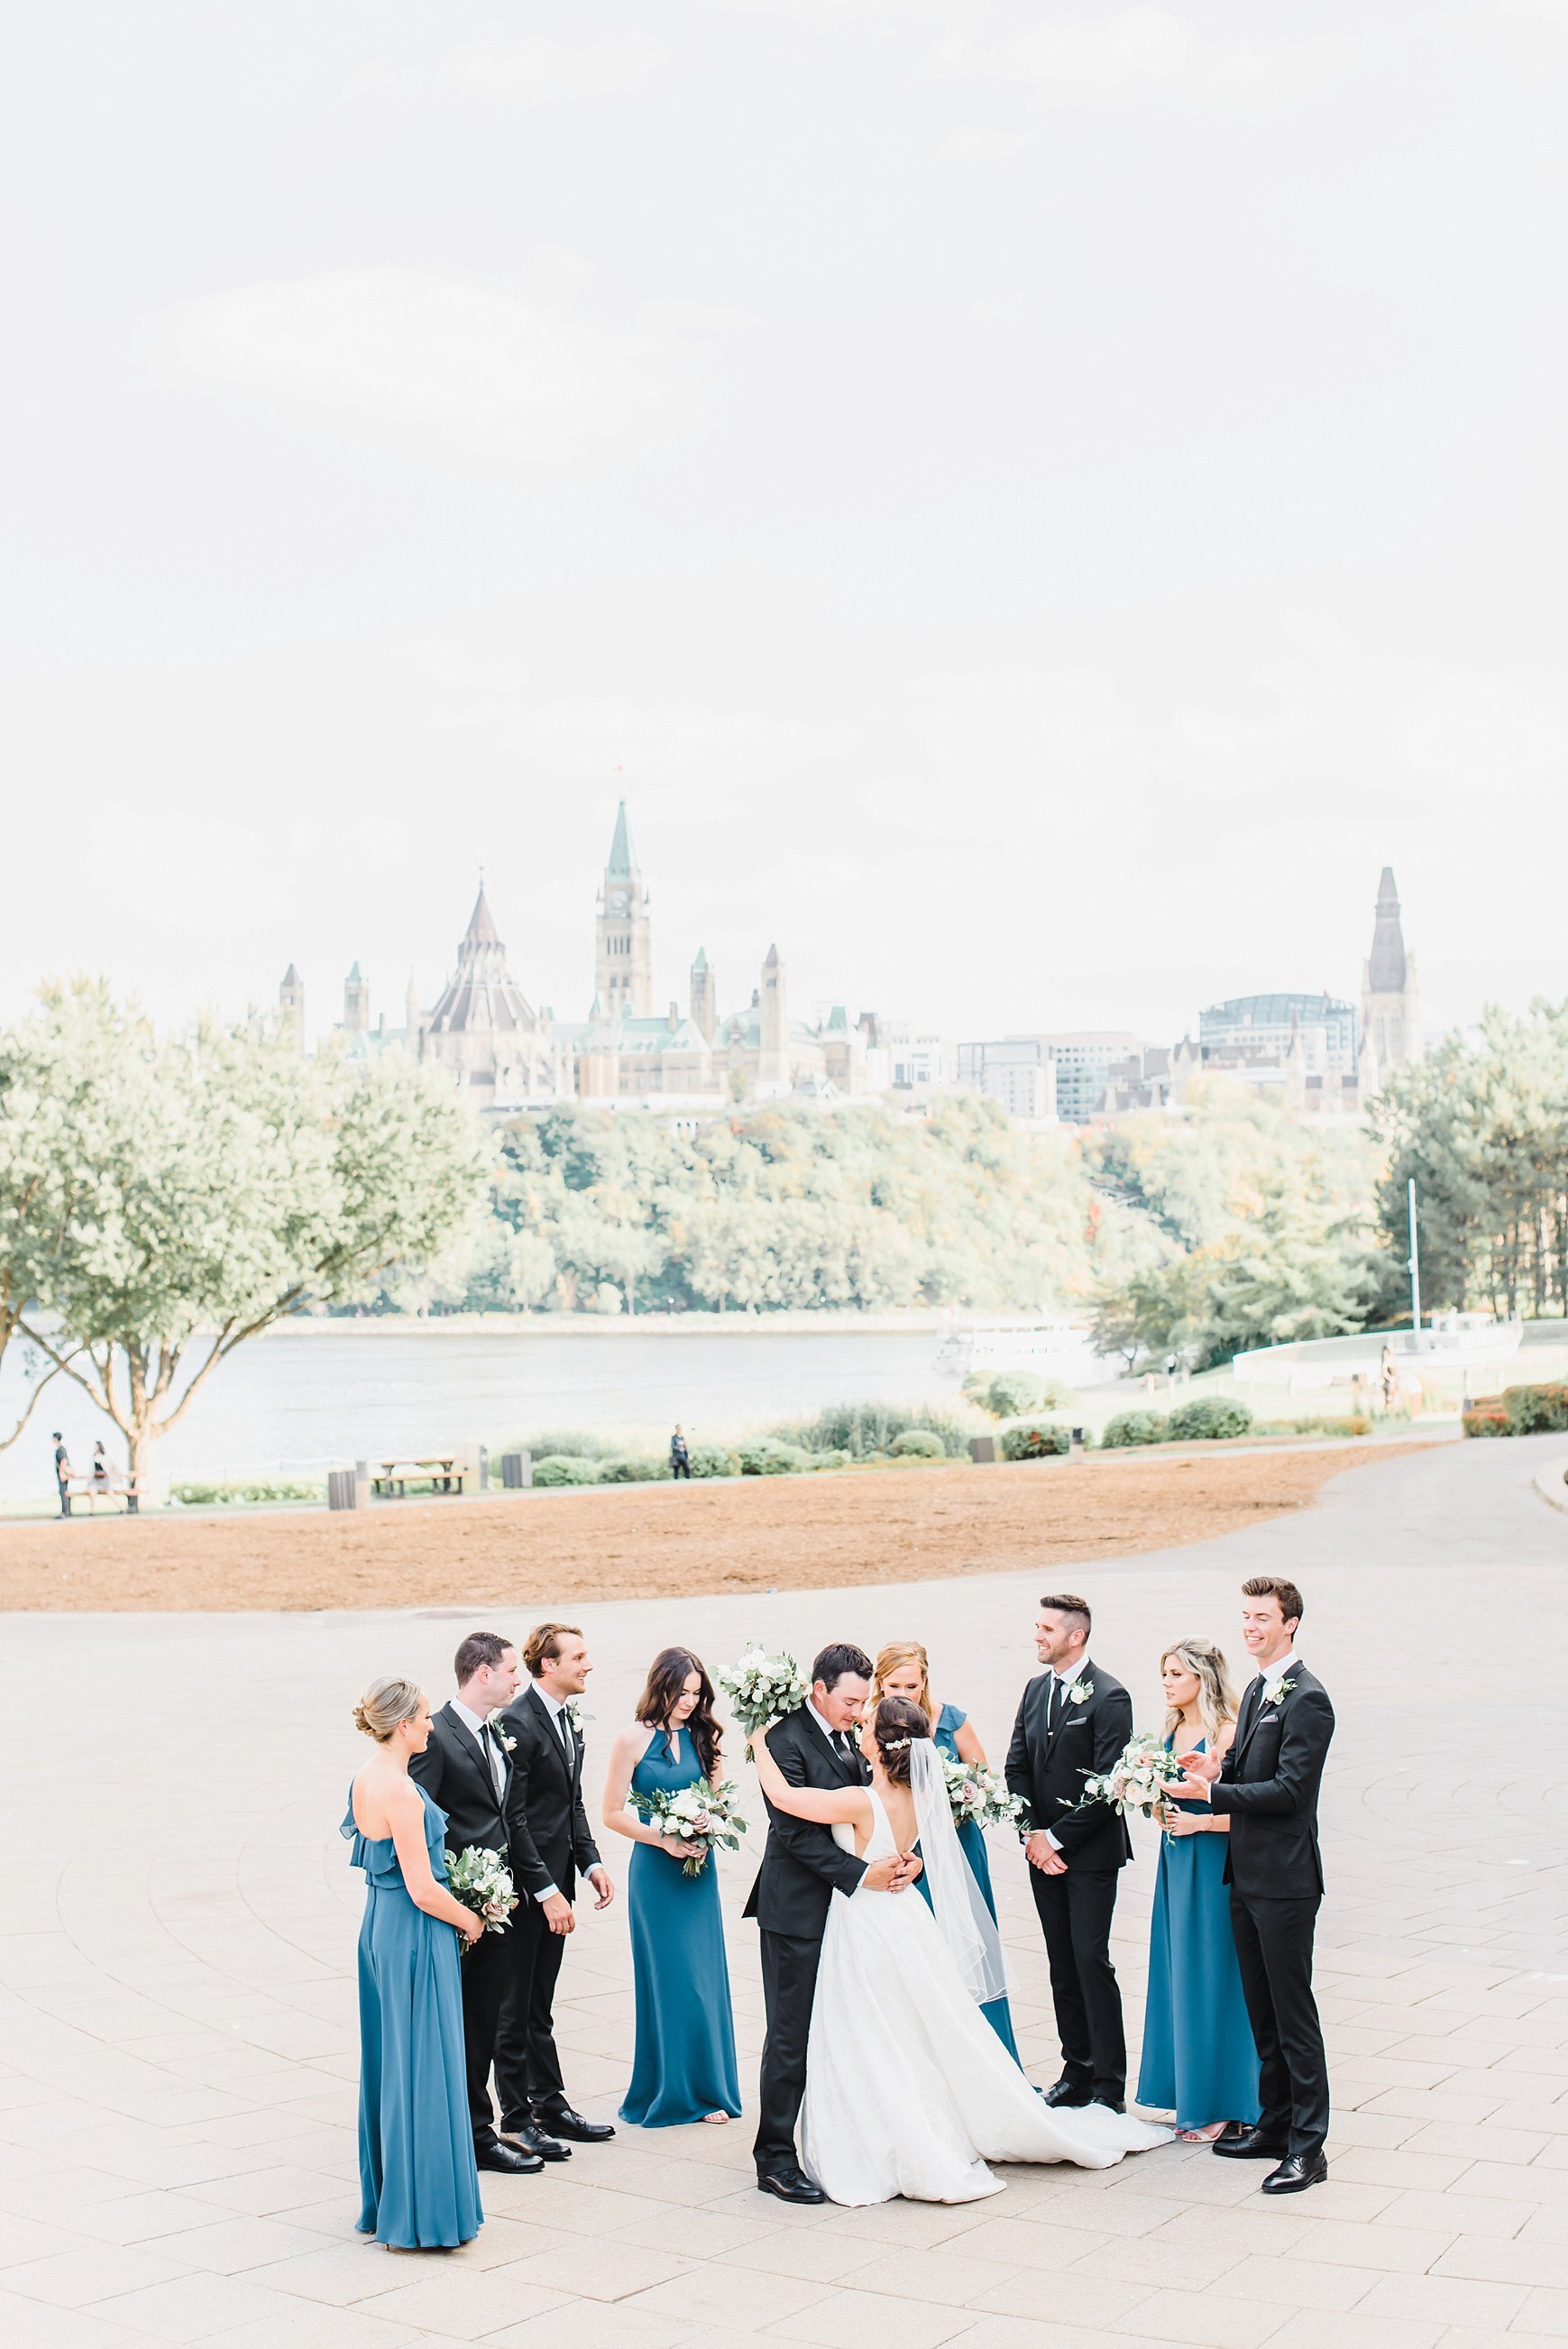  One of my favourite shots of the day! I stood up from a higher elevation to get the bridal party having a blast! 